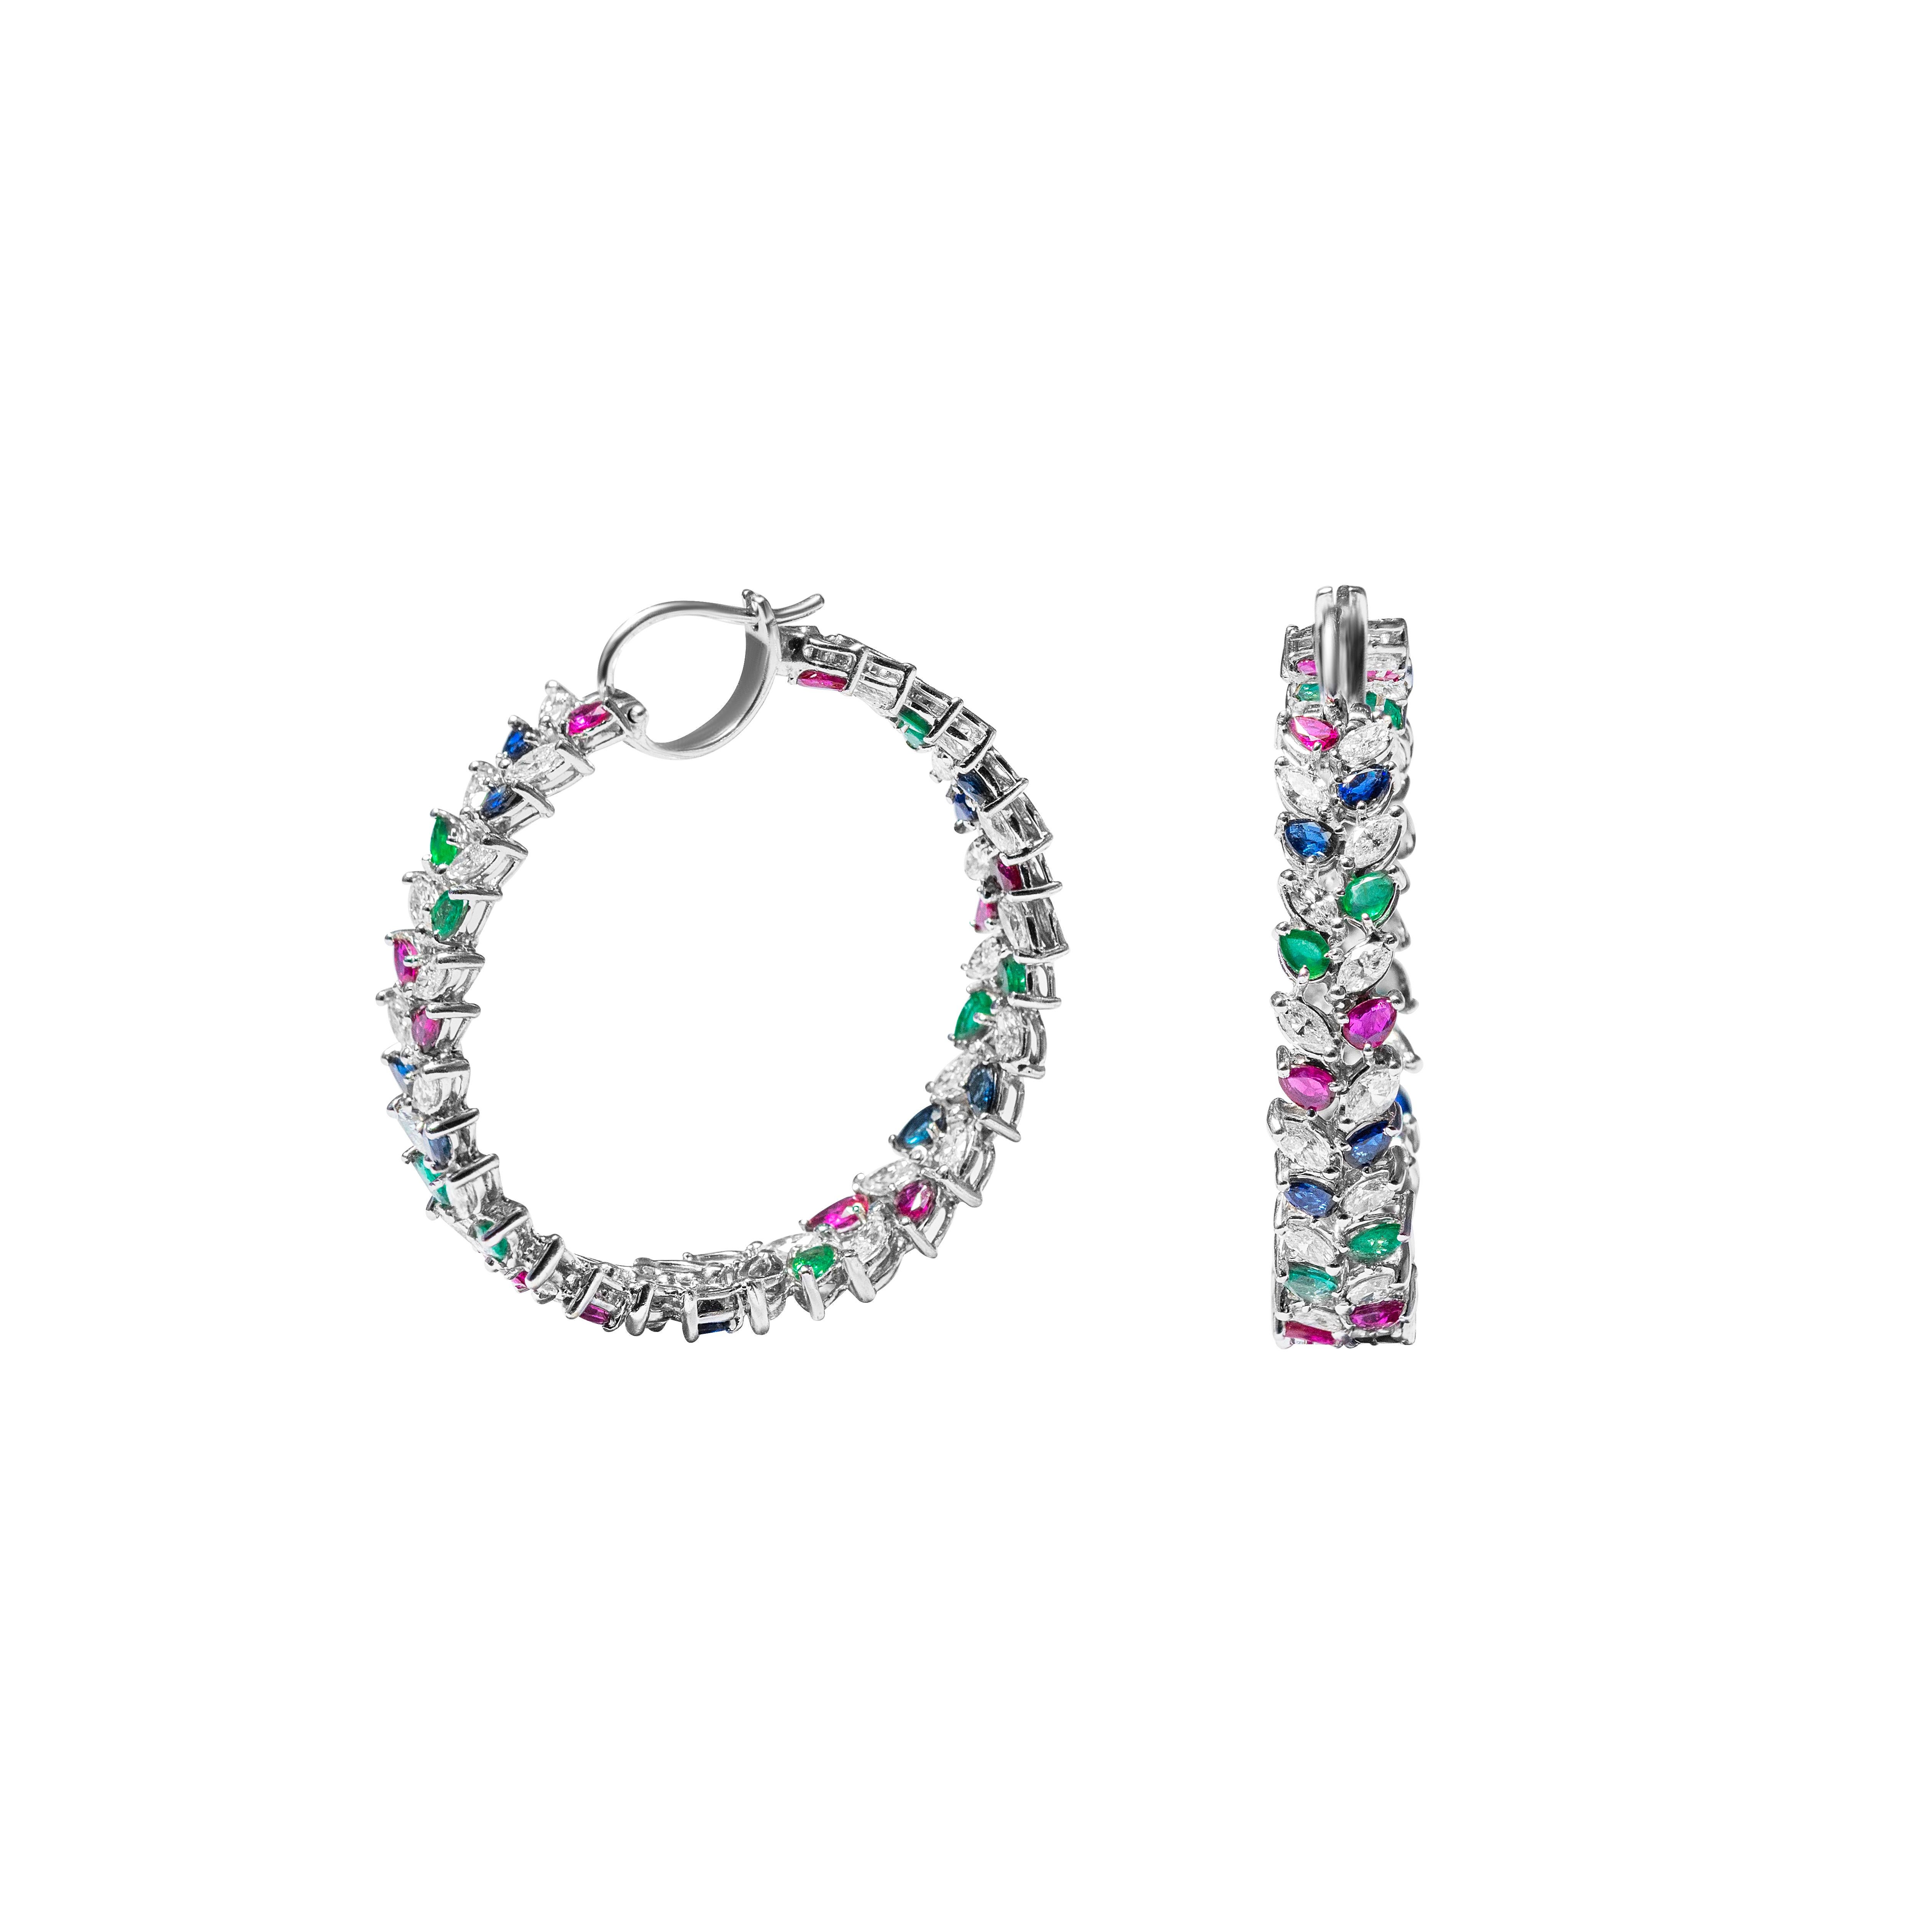 18 Karat White Gold Diamond, Ruby, Sapphire & Emerald Hoop Earrings

Exquisitely crafted, these stunning earrings set in 18 Karat white gold and studded with a mix of rubies, sapphires & emeralds, further accentuated by white diamonds are ideal for